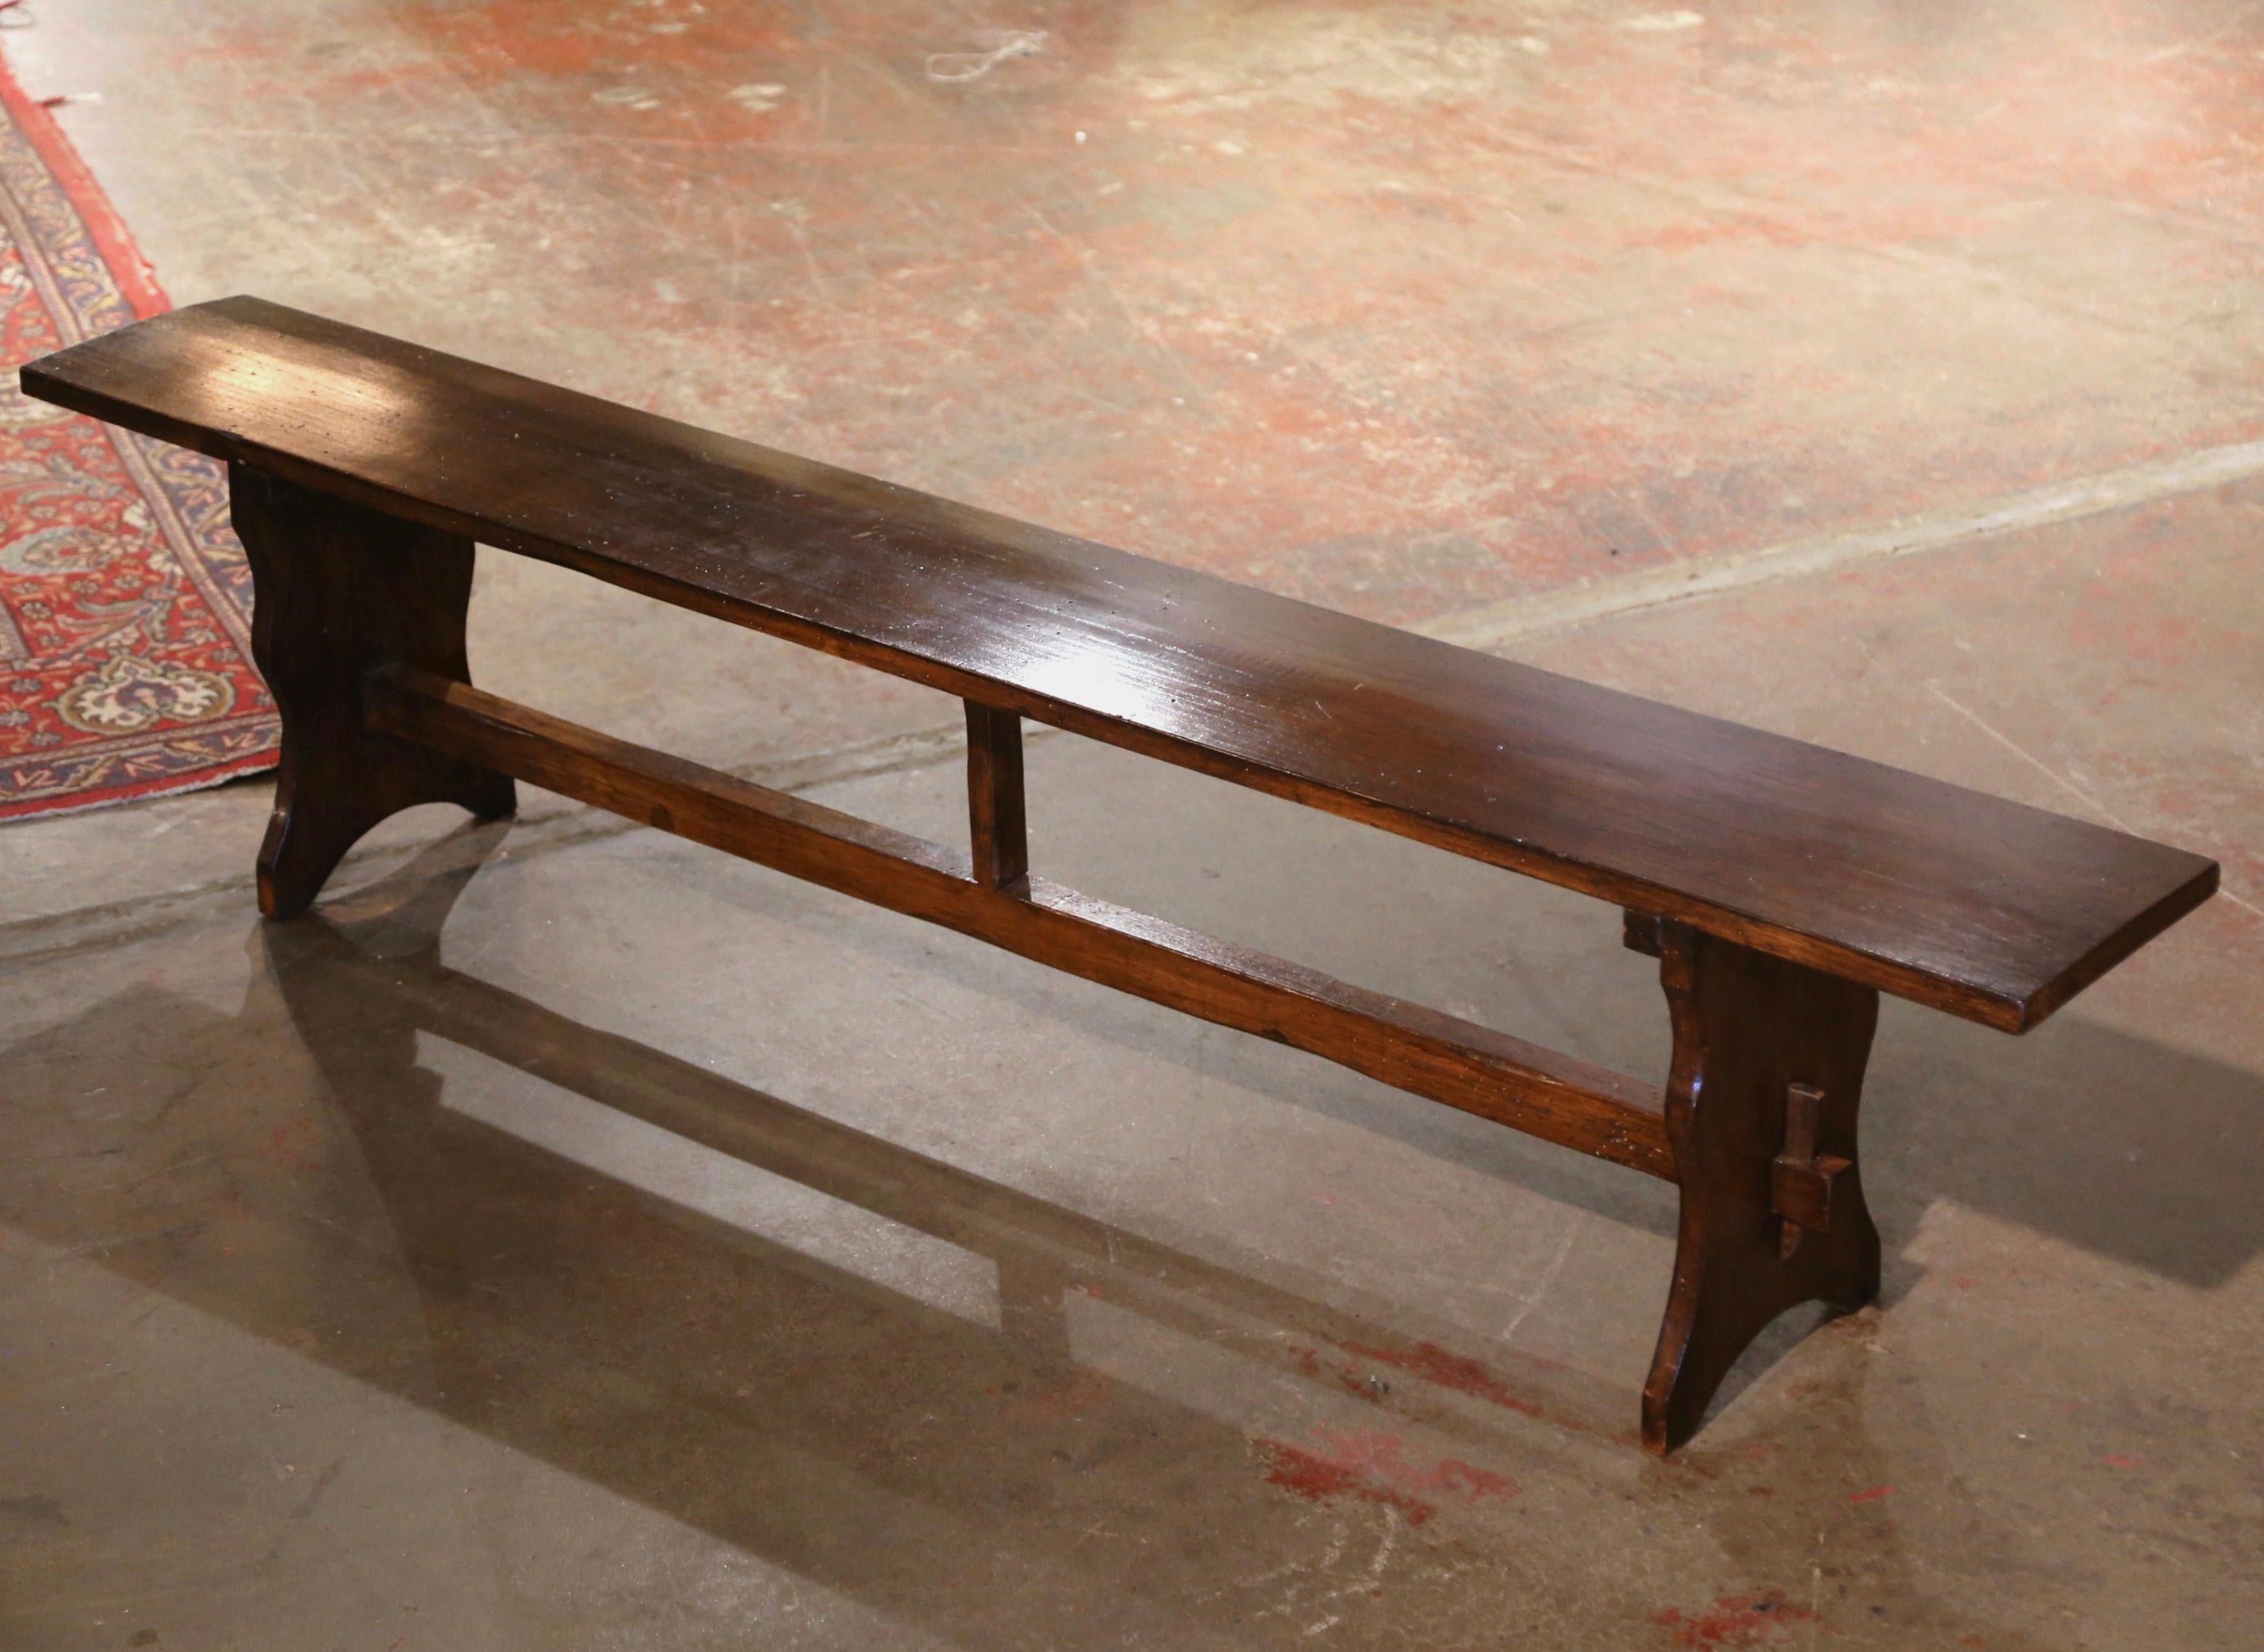 Dressed a farm table with this elegant antique provincial bench. Crafted in the Poitou region of France, circa 1890, and carved of walnut wood, the farmhouse bench stands on boot-jack legs and joined by a central stretcher. The seat is built with